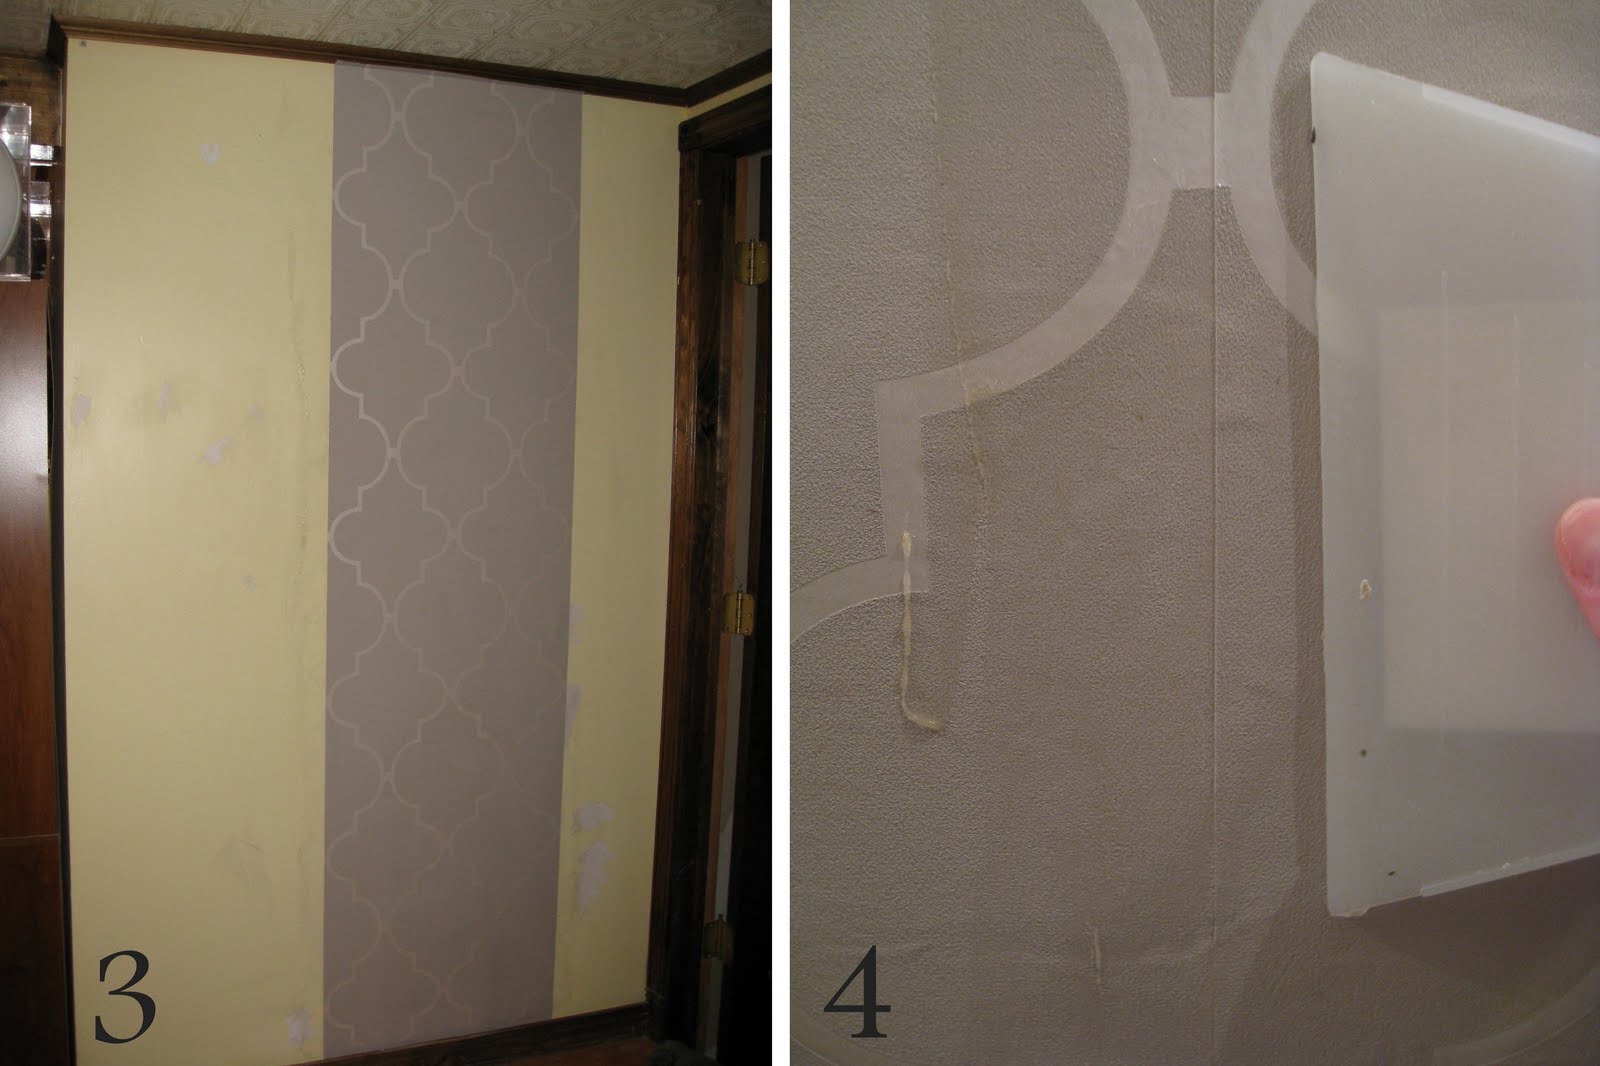 Step 3: You're ready to apply the wallpaper to the wall.